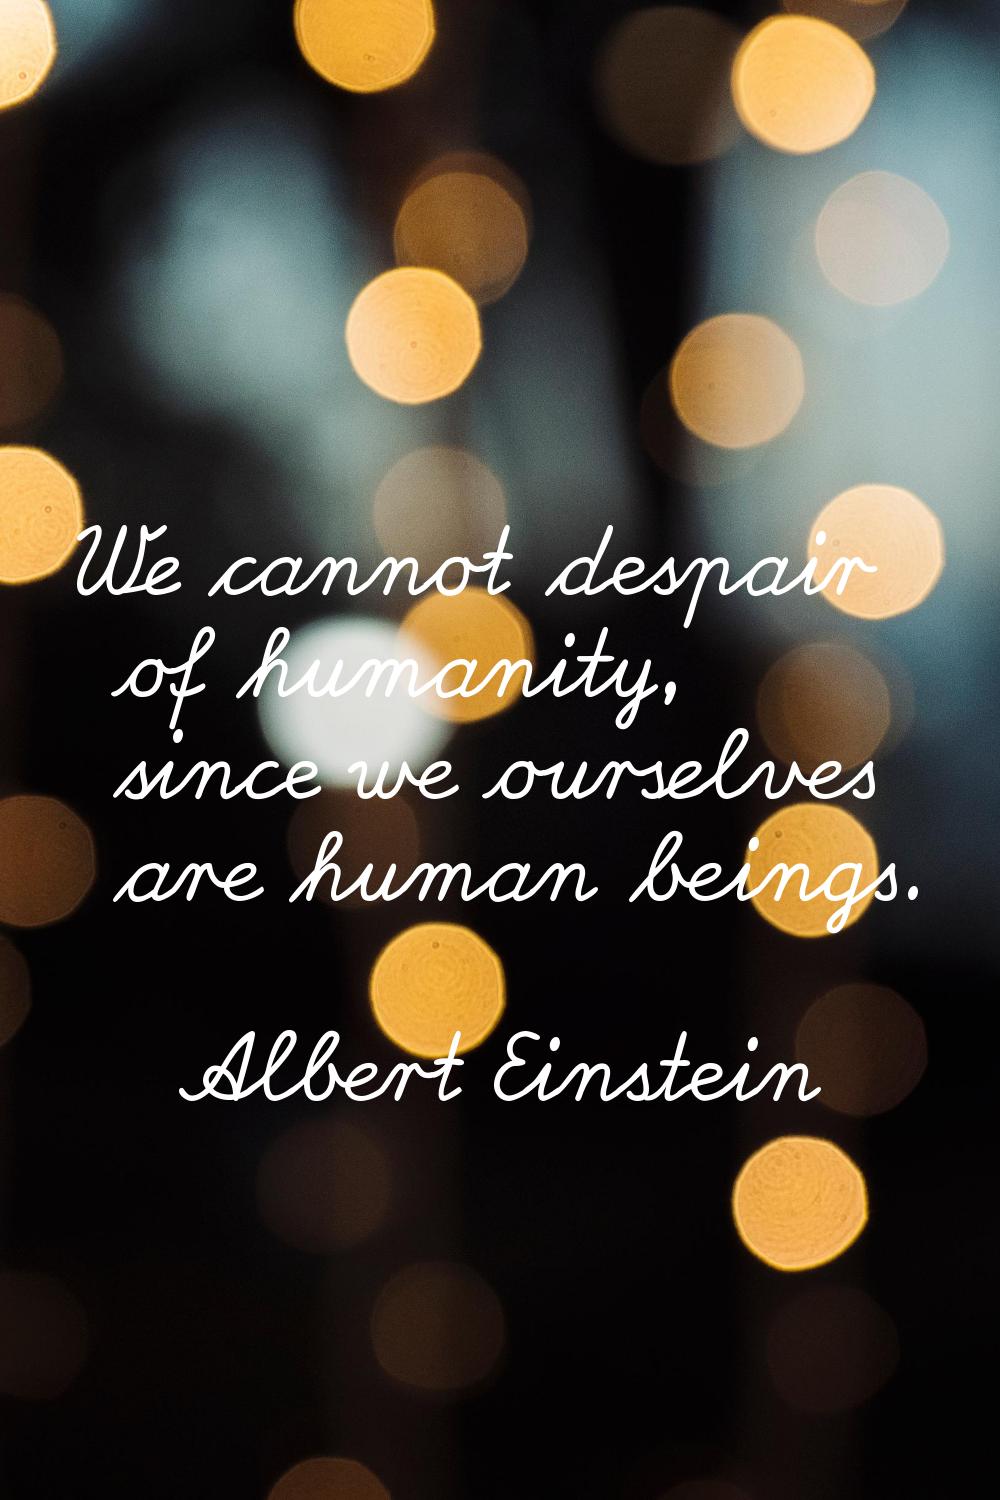 We cannot despair of humanity, since we ourselves are human beings.